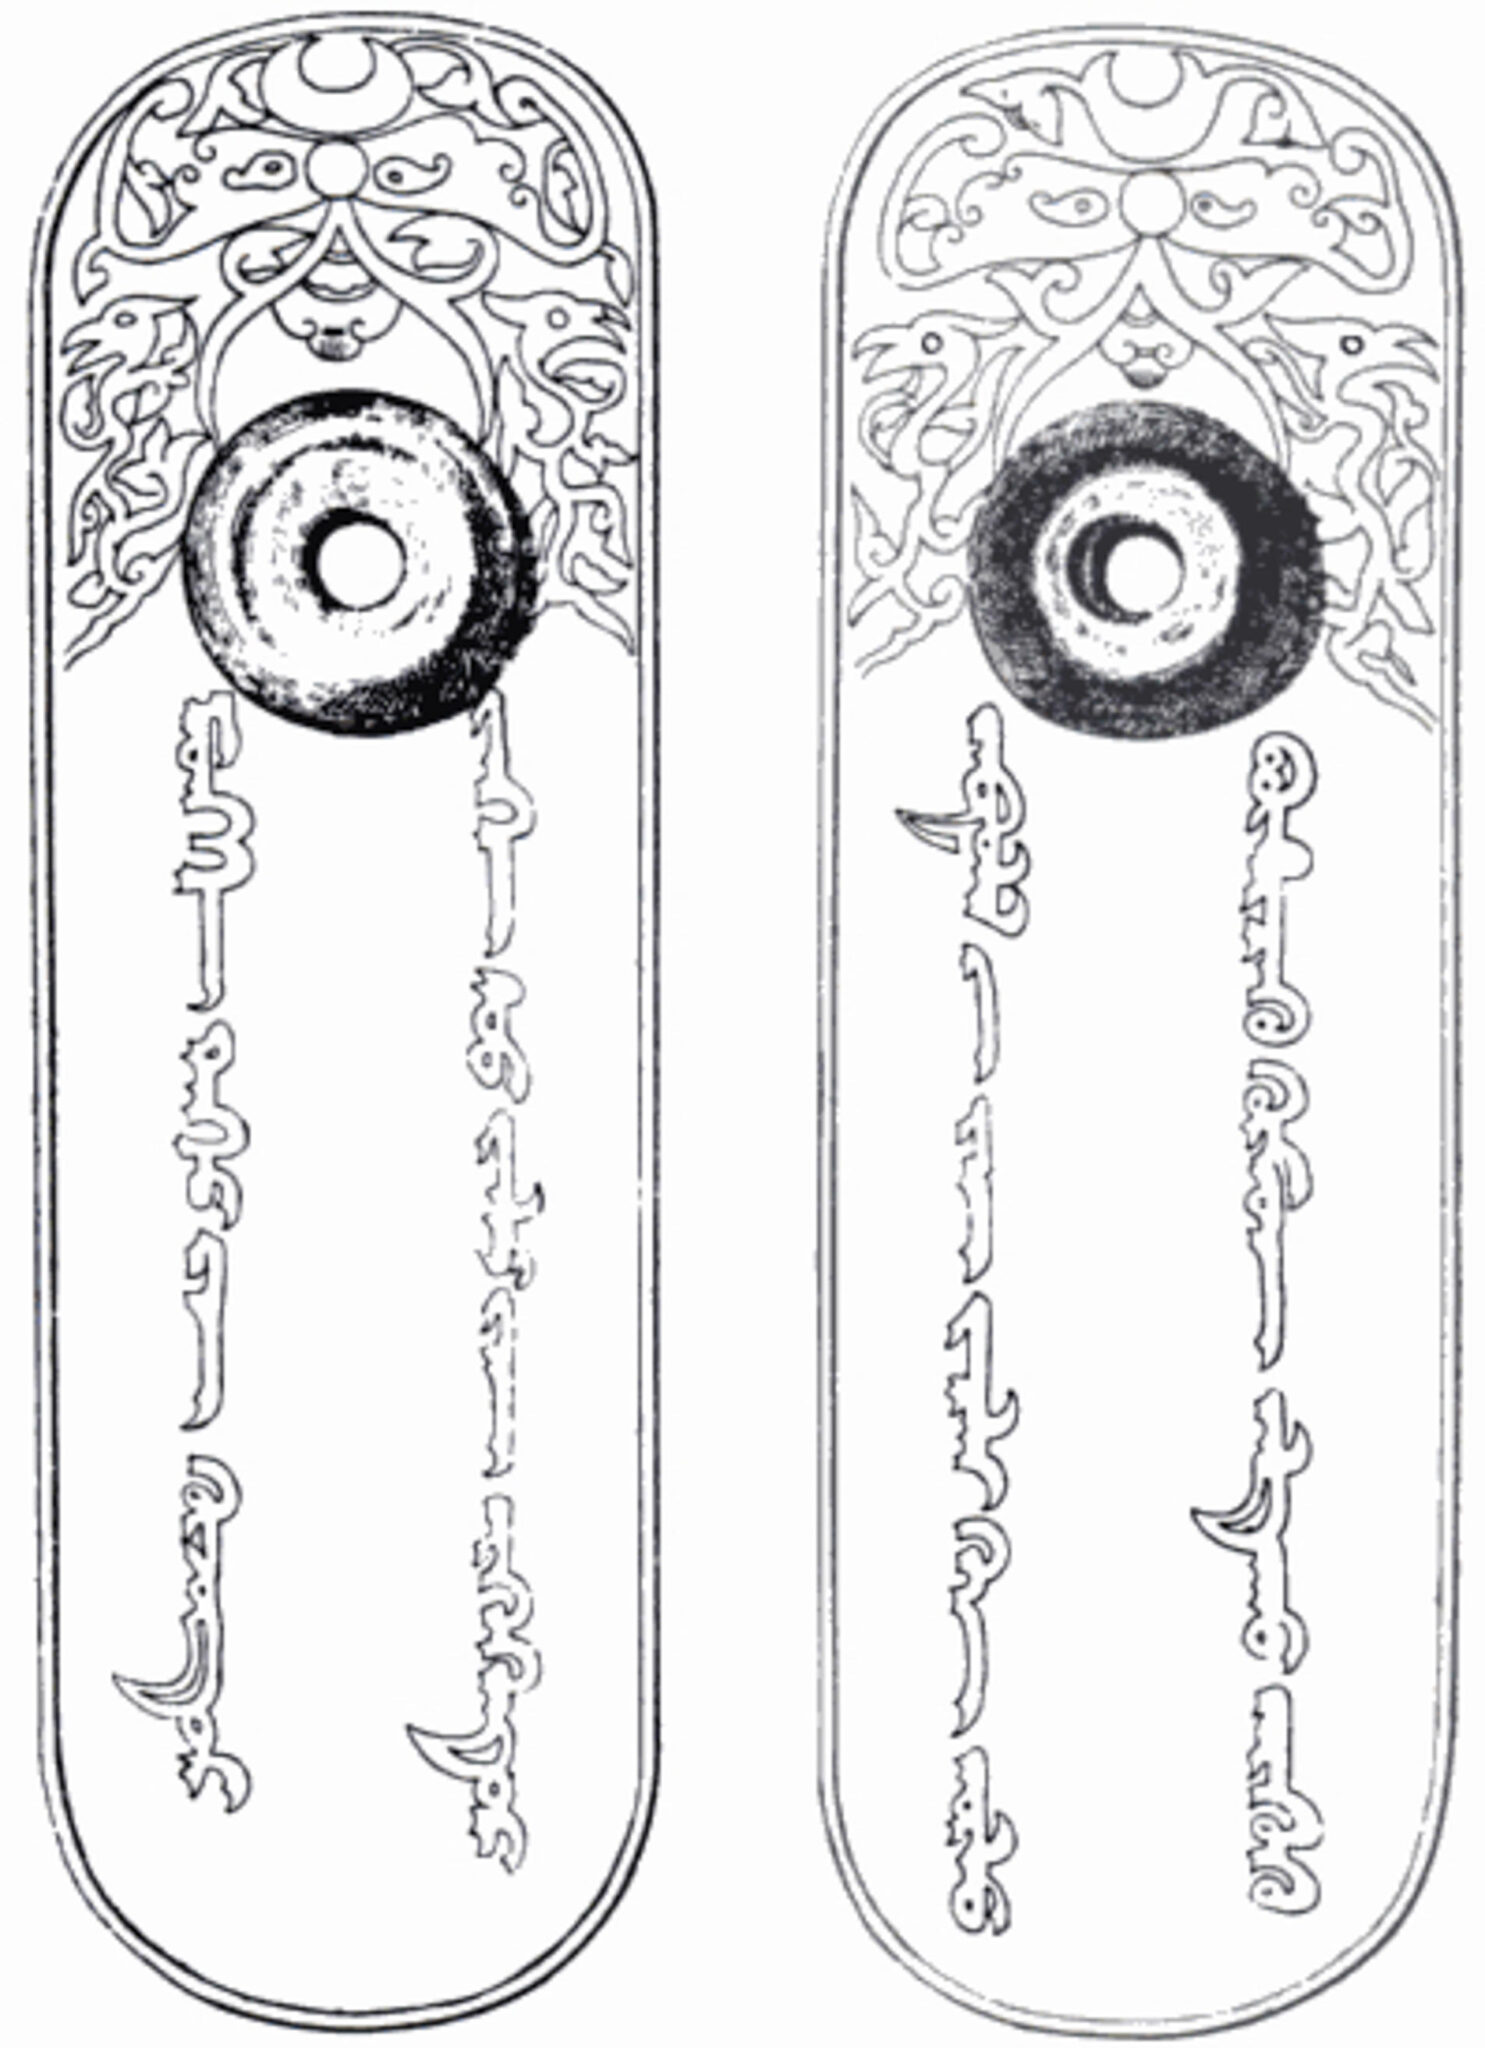 Illustration of two oblong objects, each with hole and divine creatures at top third above two columns of script